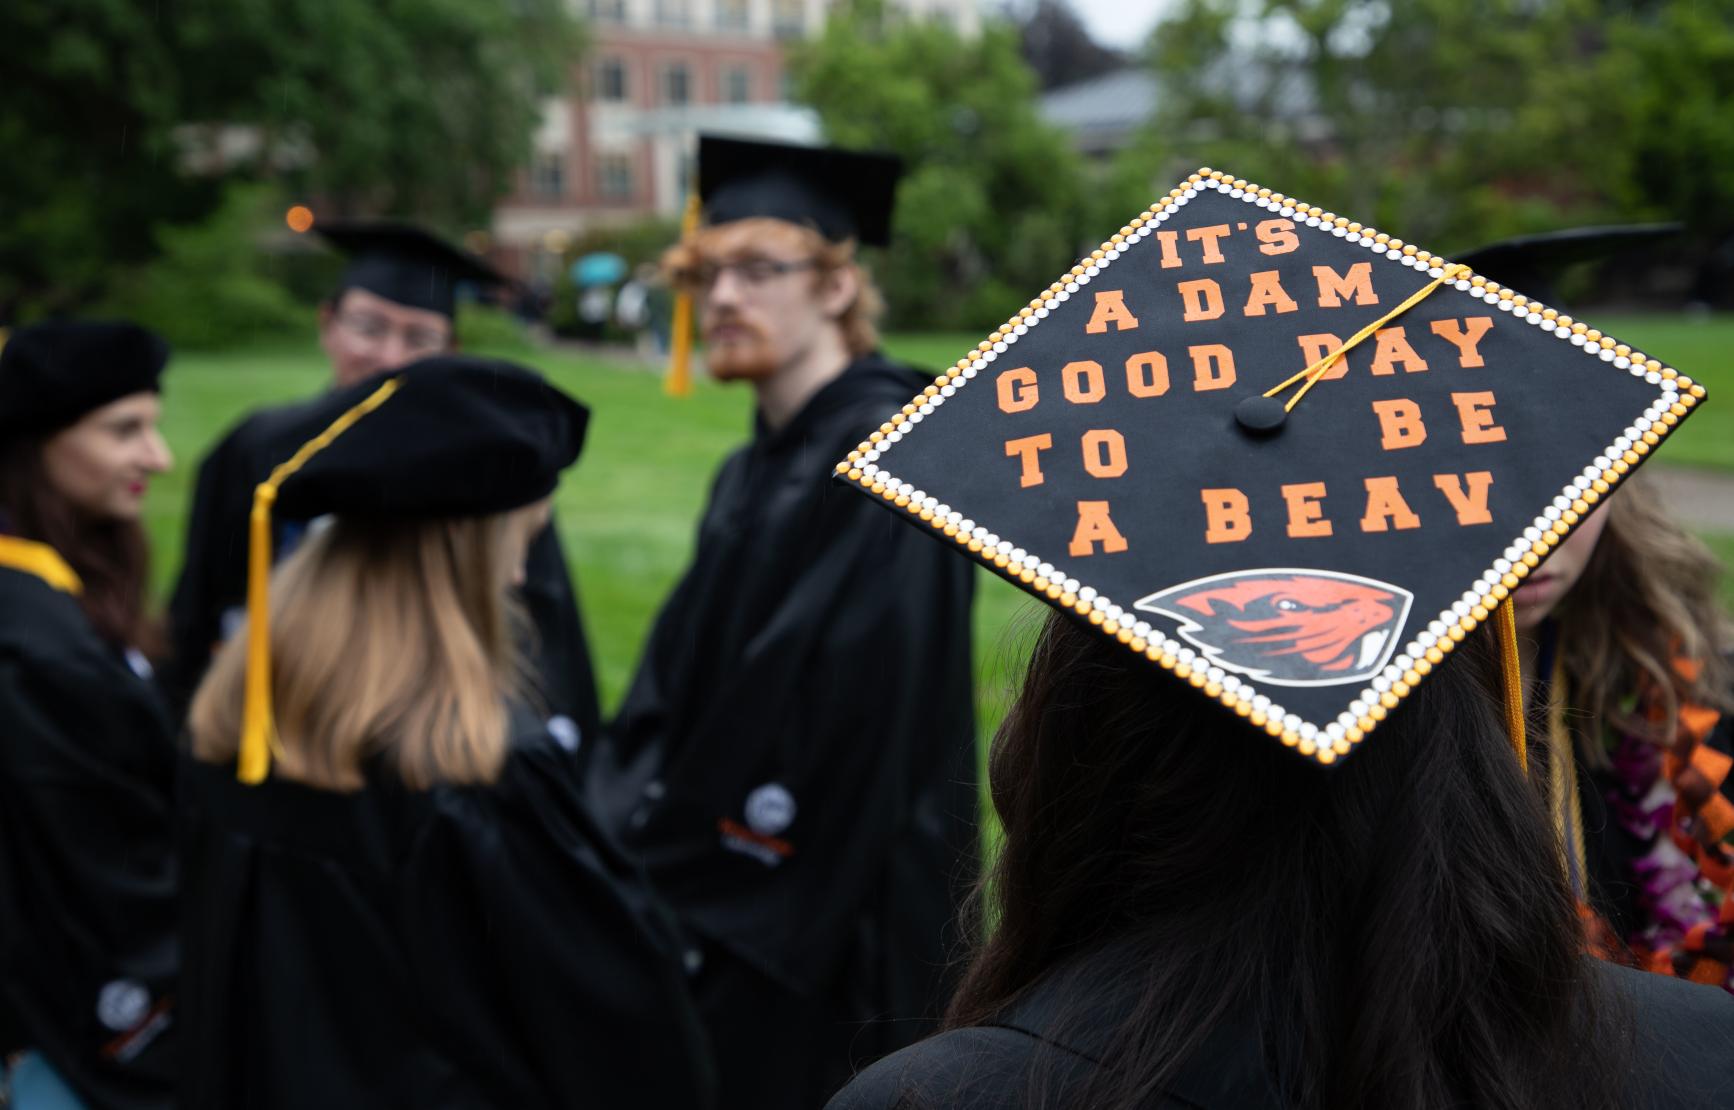 Three OSU graduates, with a grad cap that reads "It's a dam good day to be a beav."